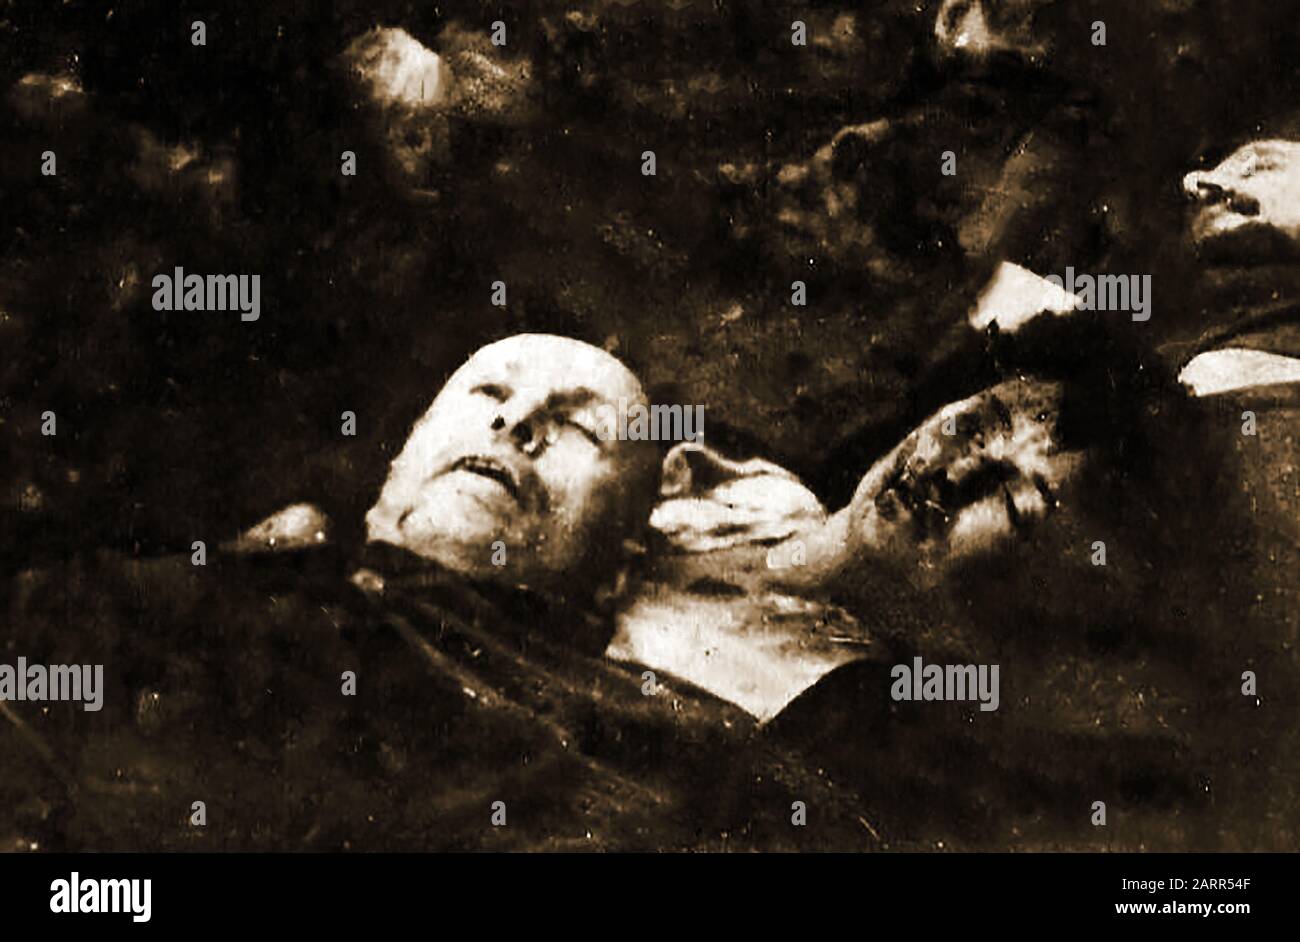 MUSSOLINI -The body of  Mussolini and his mistress Clara Petacci shortly after being shot  -  Benito Amilcare Andrea Mussolini (1883-1945) was a Political Journalist, Prime Minister of Italy, Minister of Foreign Affairs, Duce  of the Italian Social Republic , Dictator & leader of the National Fascist Party.  He and his mistress  Clara Petacci , and followers were summarily shot after being captured by partisans and were taken to Milan where their bodies were kicked, mutilated and hung upside down. Stock Photo